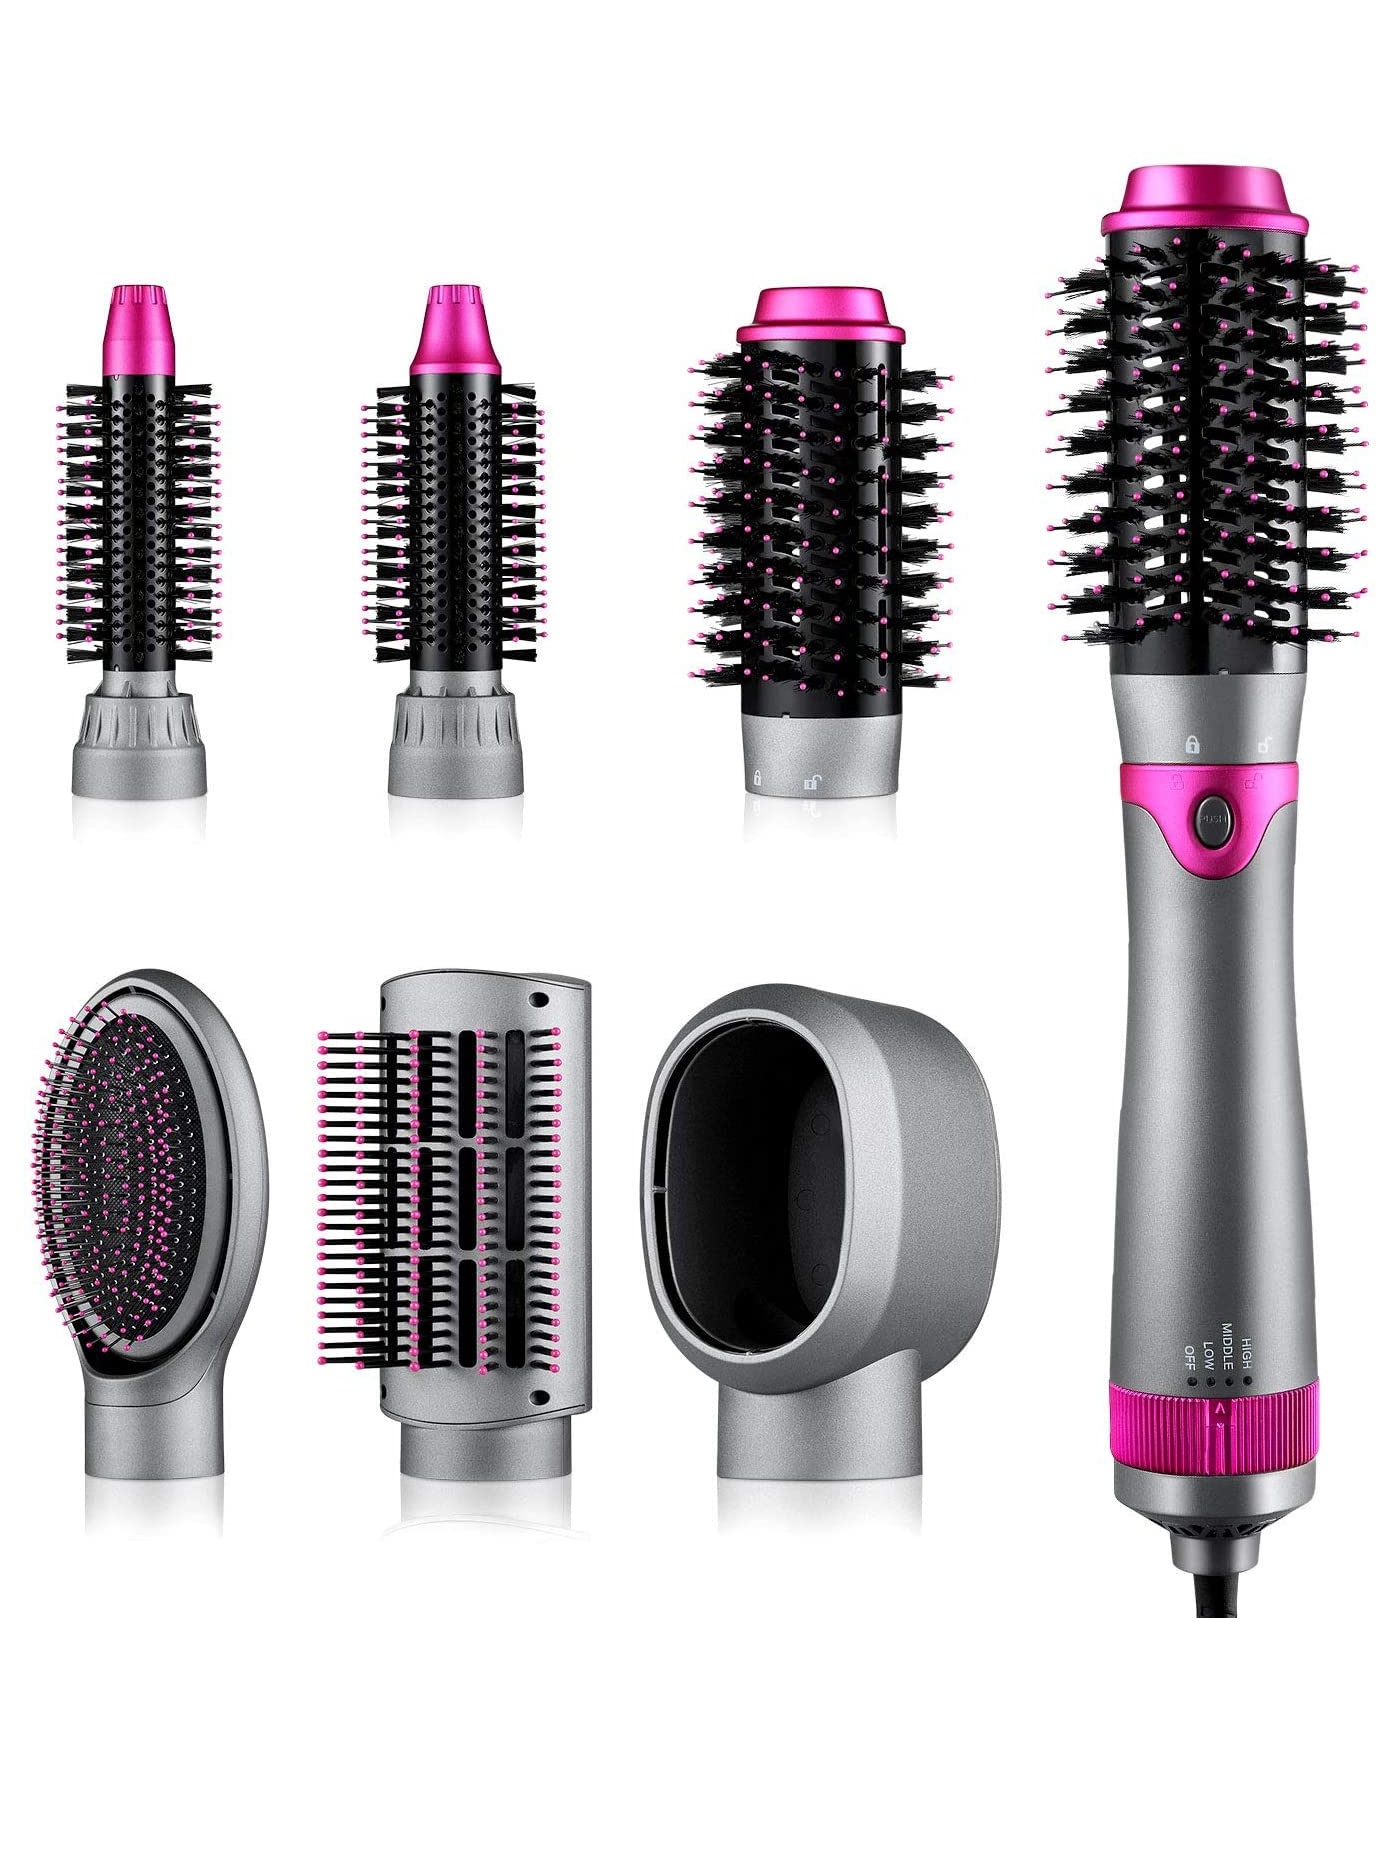 6 in 1 Hair Multifunctional Hot Air Brush and Styling Tools